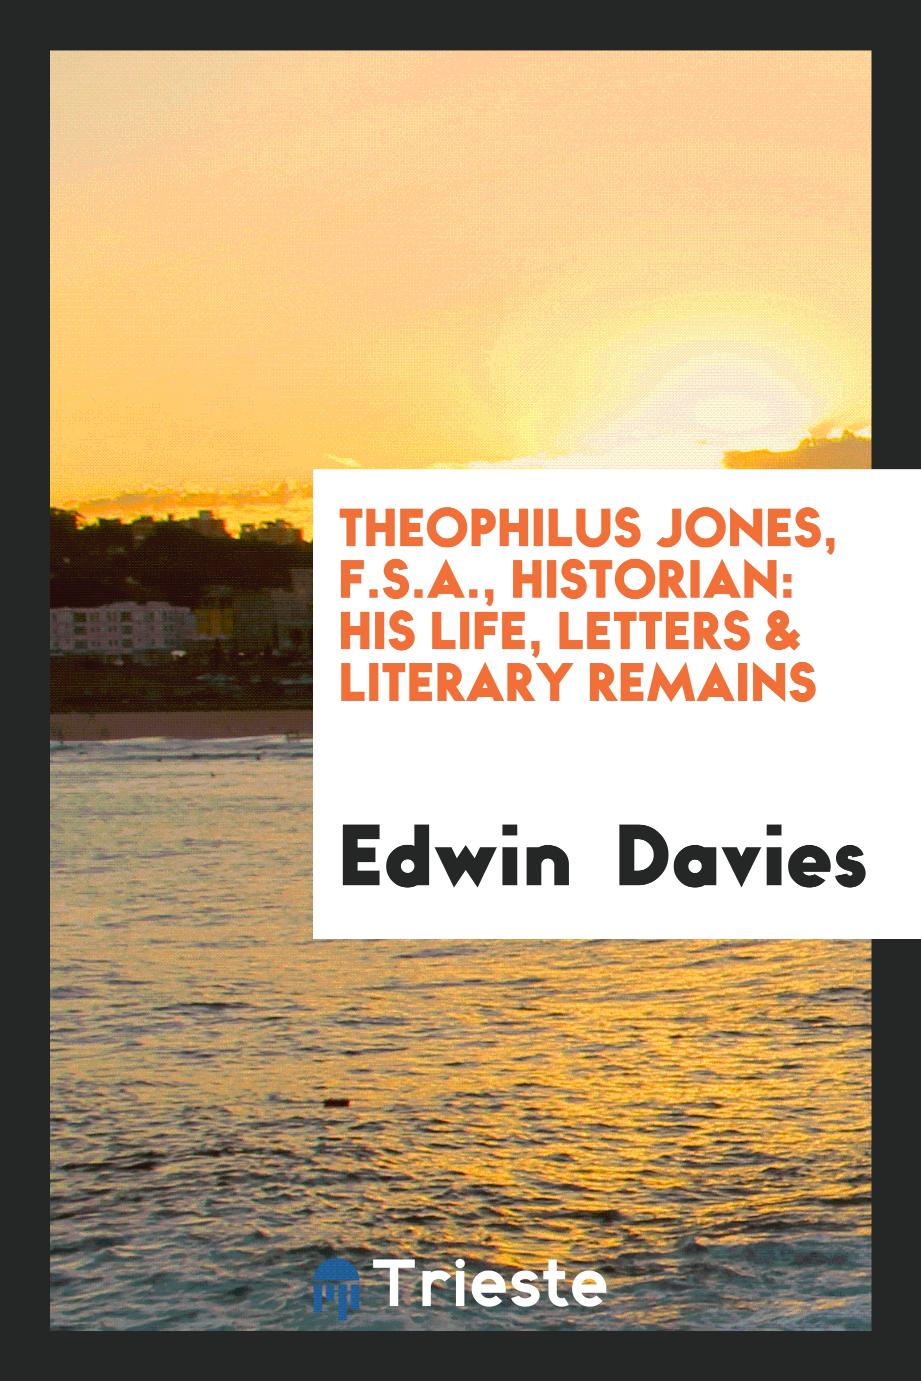 Theophilus Jones, F.S.A., Historian: His Life, Letters & Literary Remains